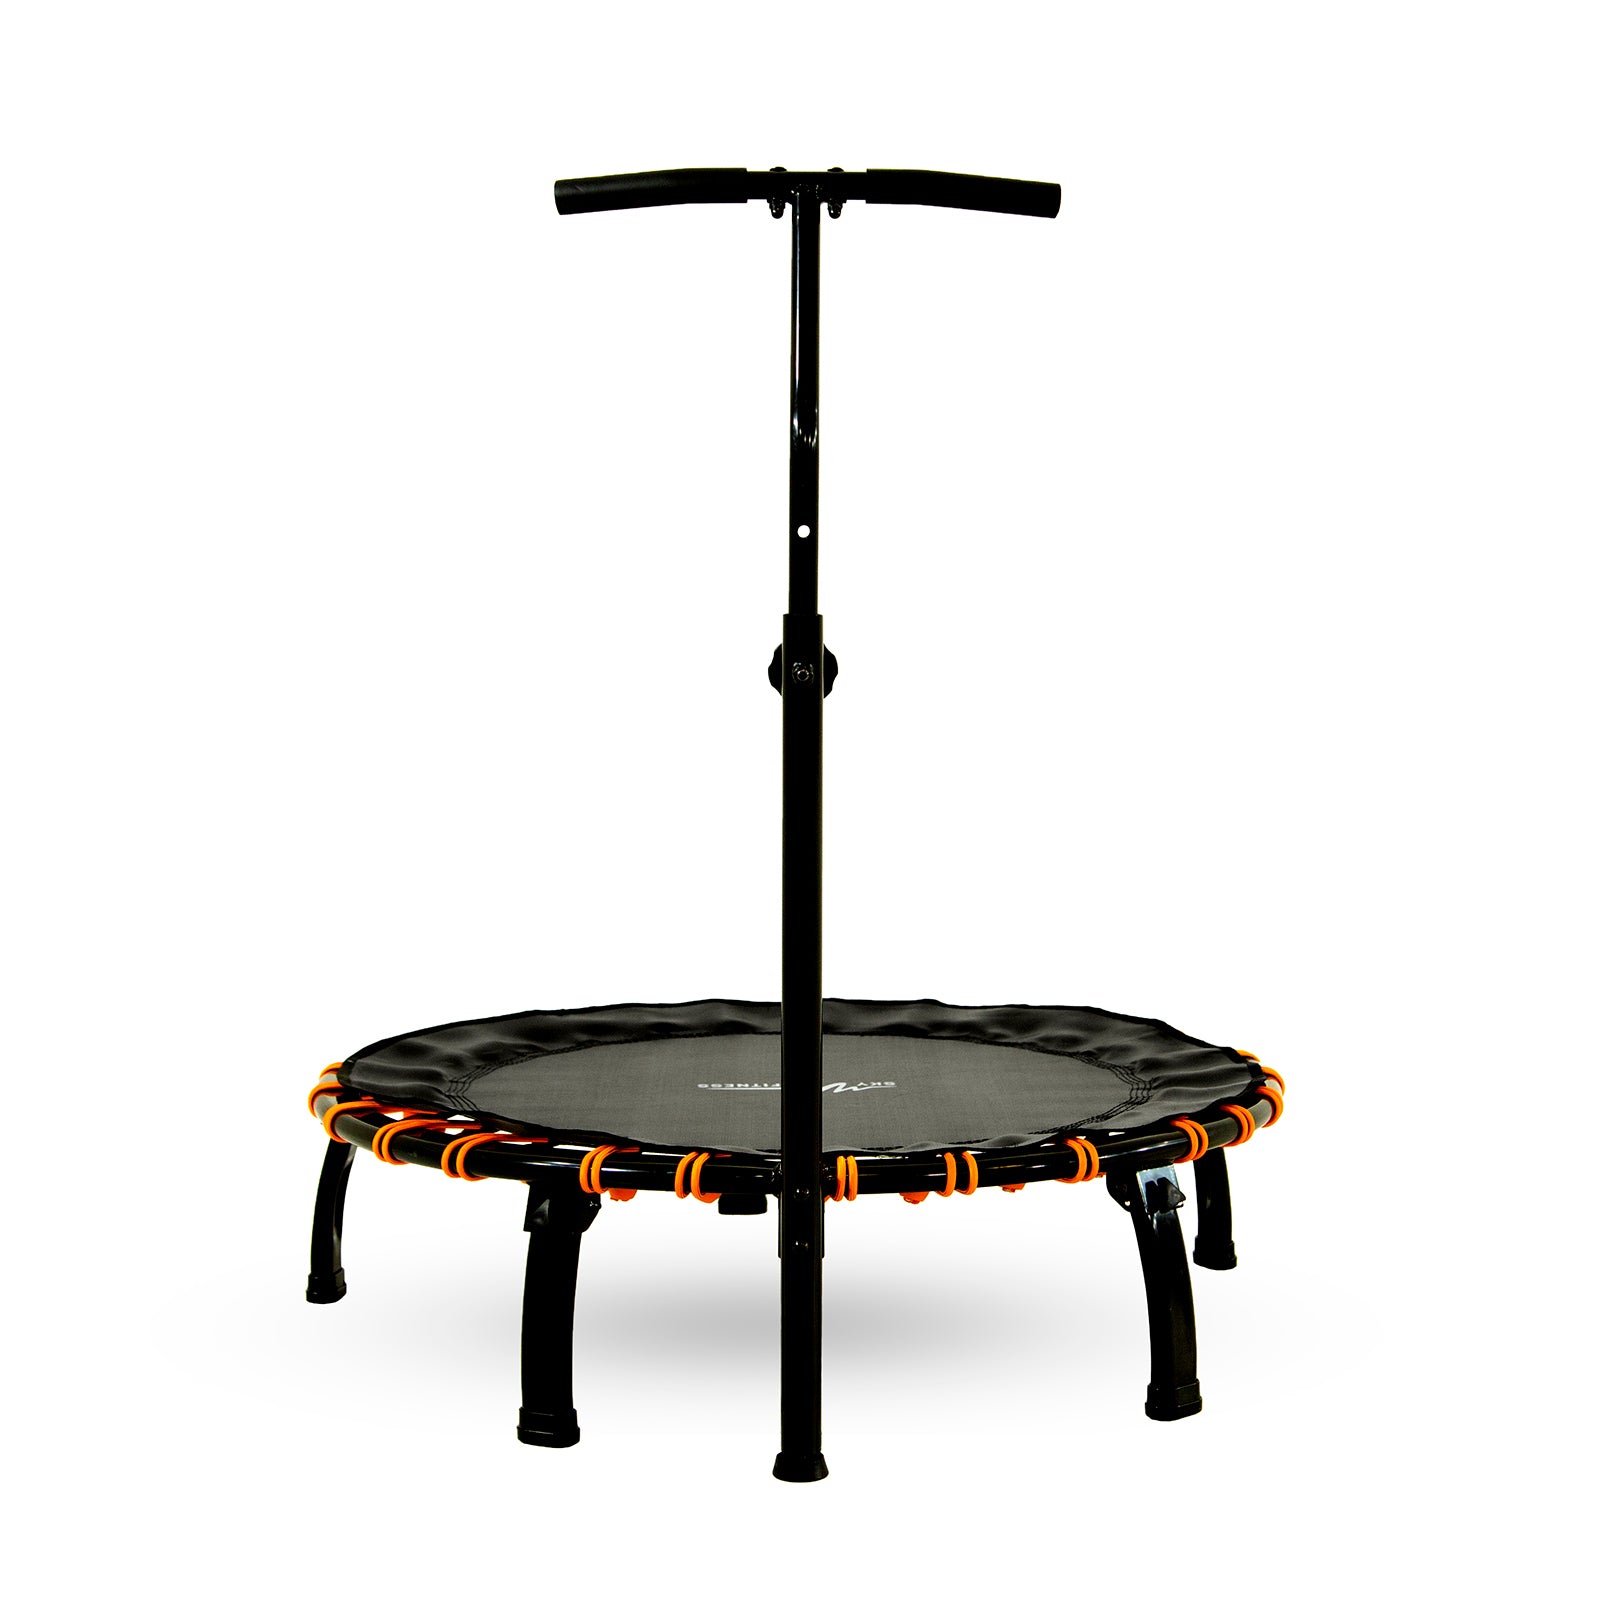 The 40-inch SkyFitness trampoline is black with orange bungee cords. 